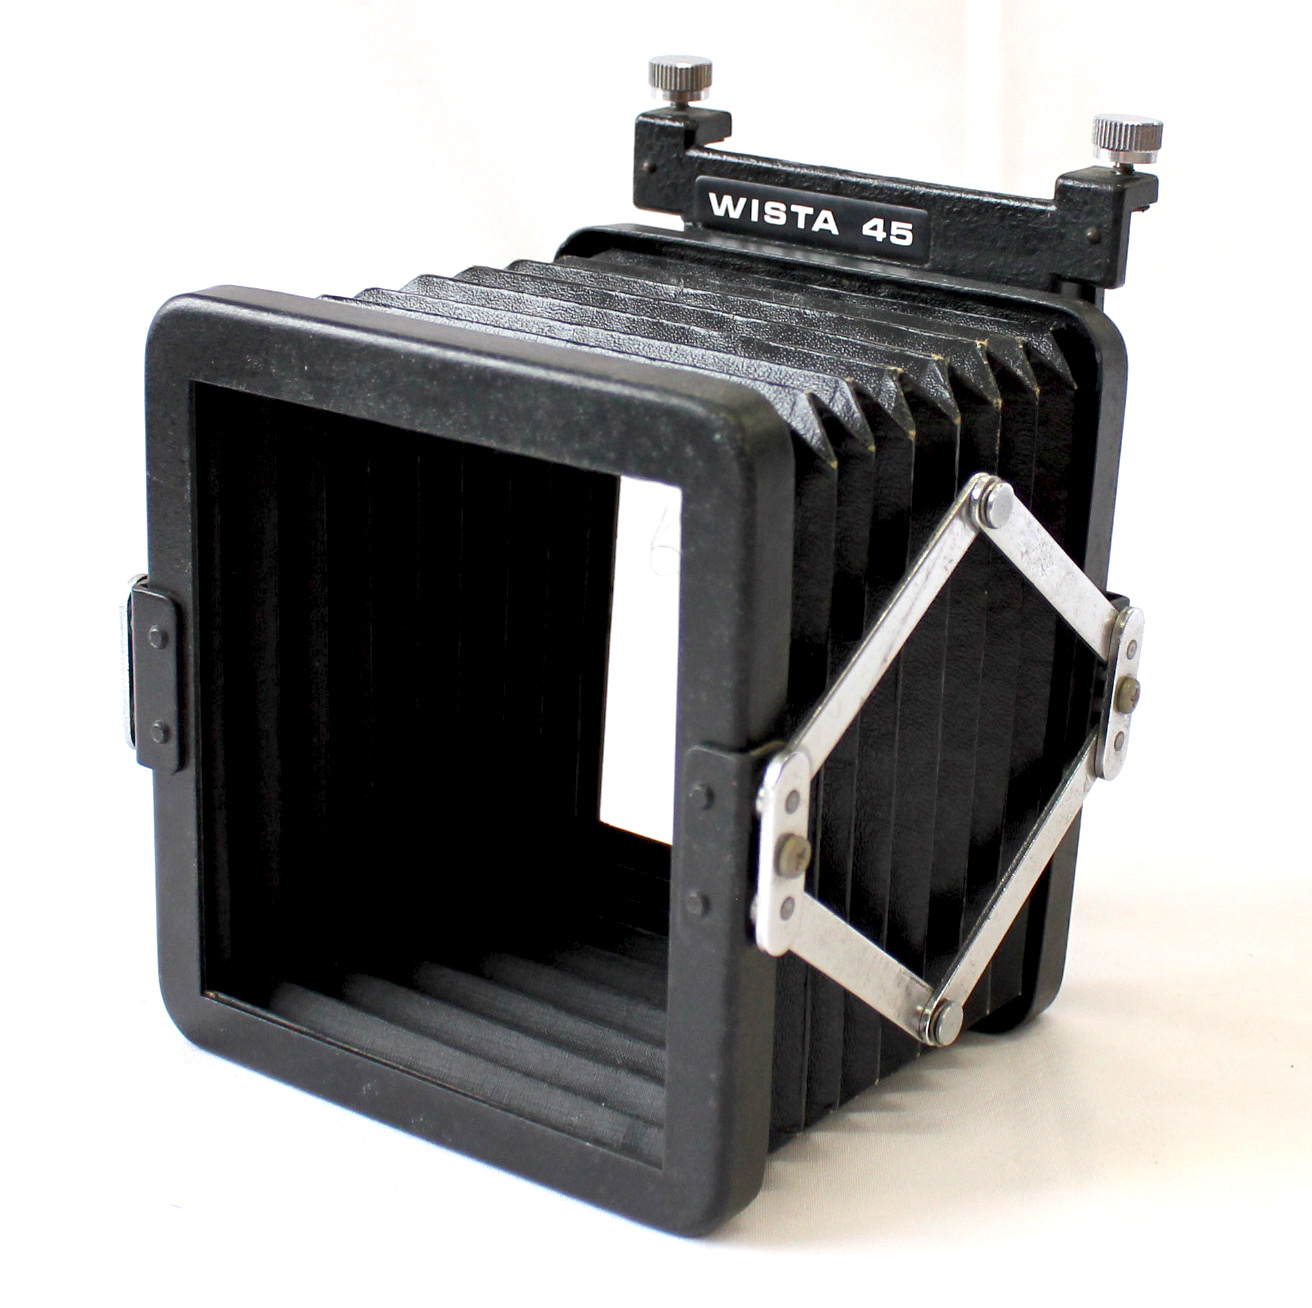 Wista Bellows Lens Hood Shade for Wista 45 Large Format Camera from Japan